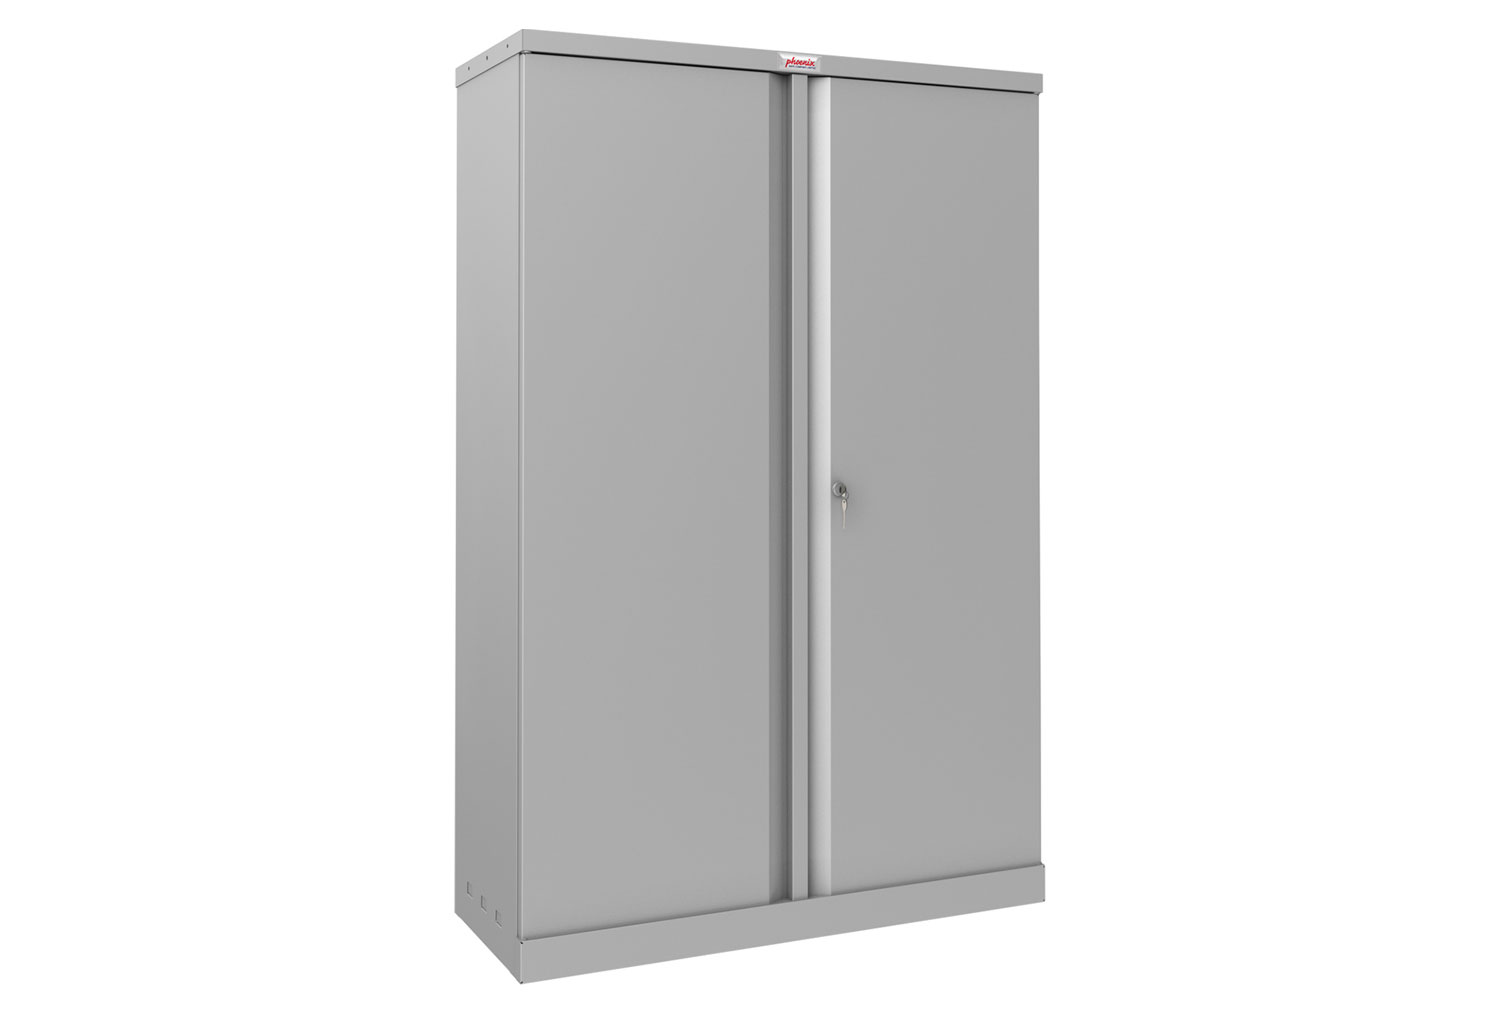 Phoenix SCL Steel Storage Office Cupboards With Key Lock, 3 Shelf - 92wx37dx140h (cm), Grey, Express Delivery